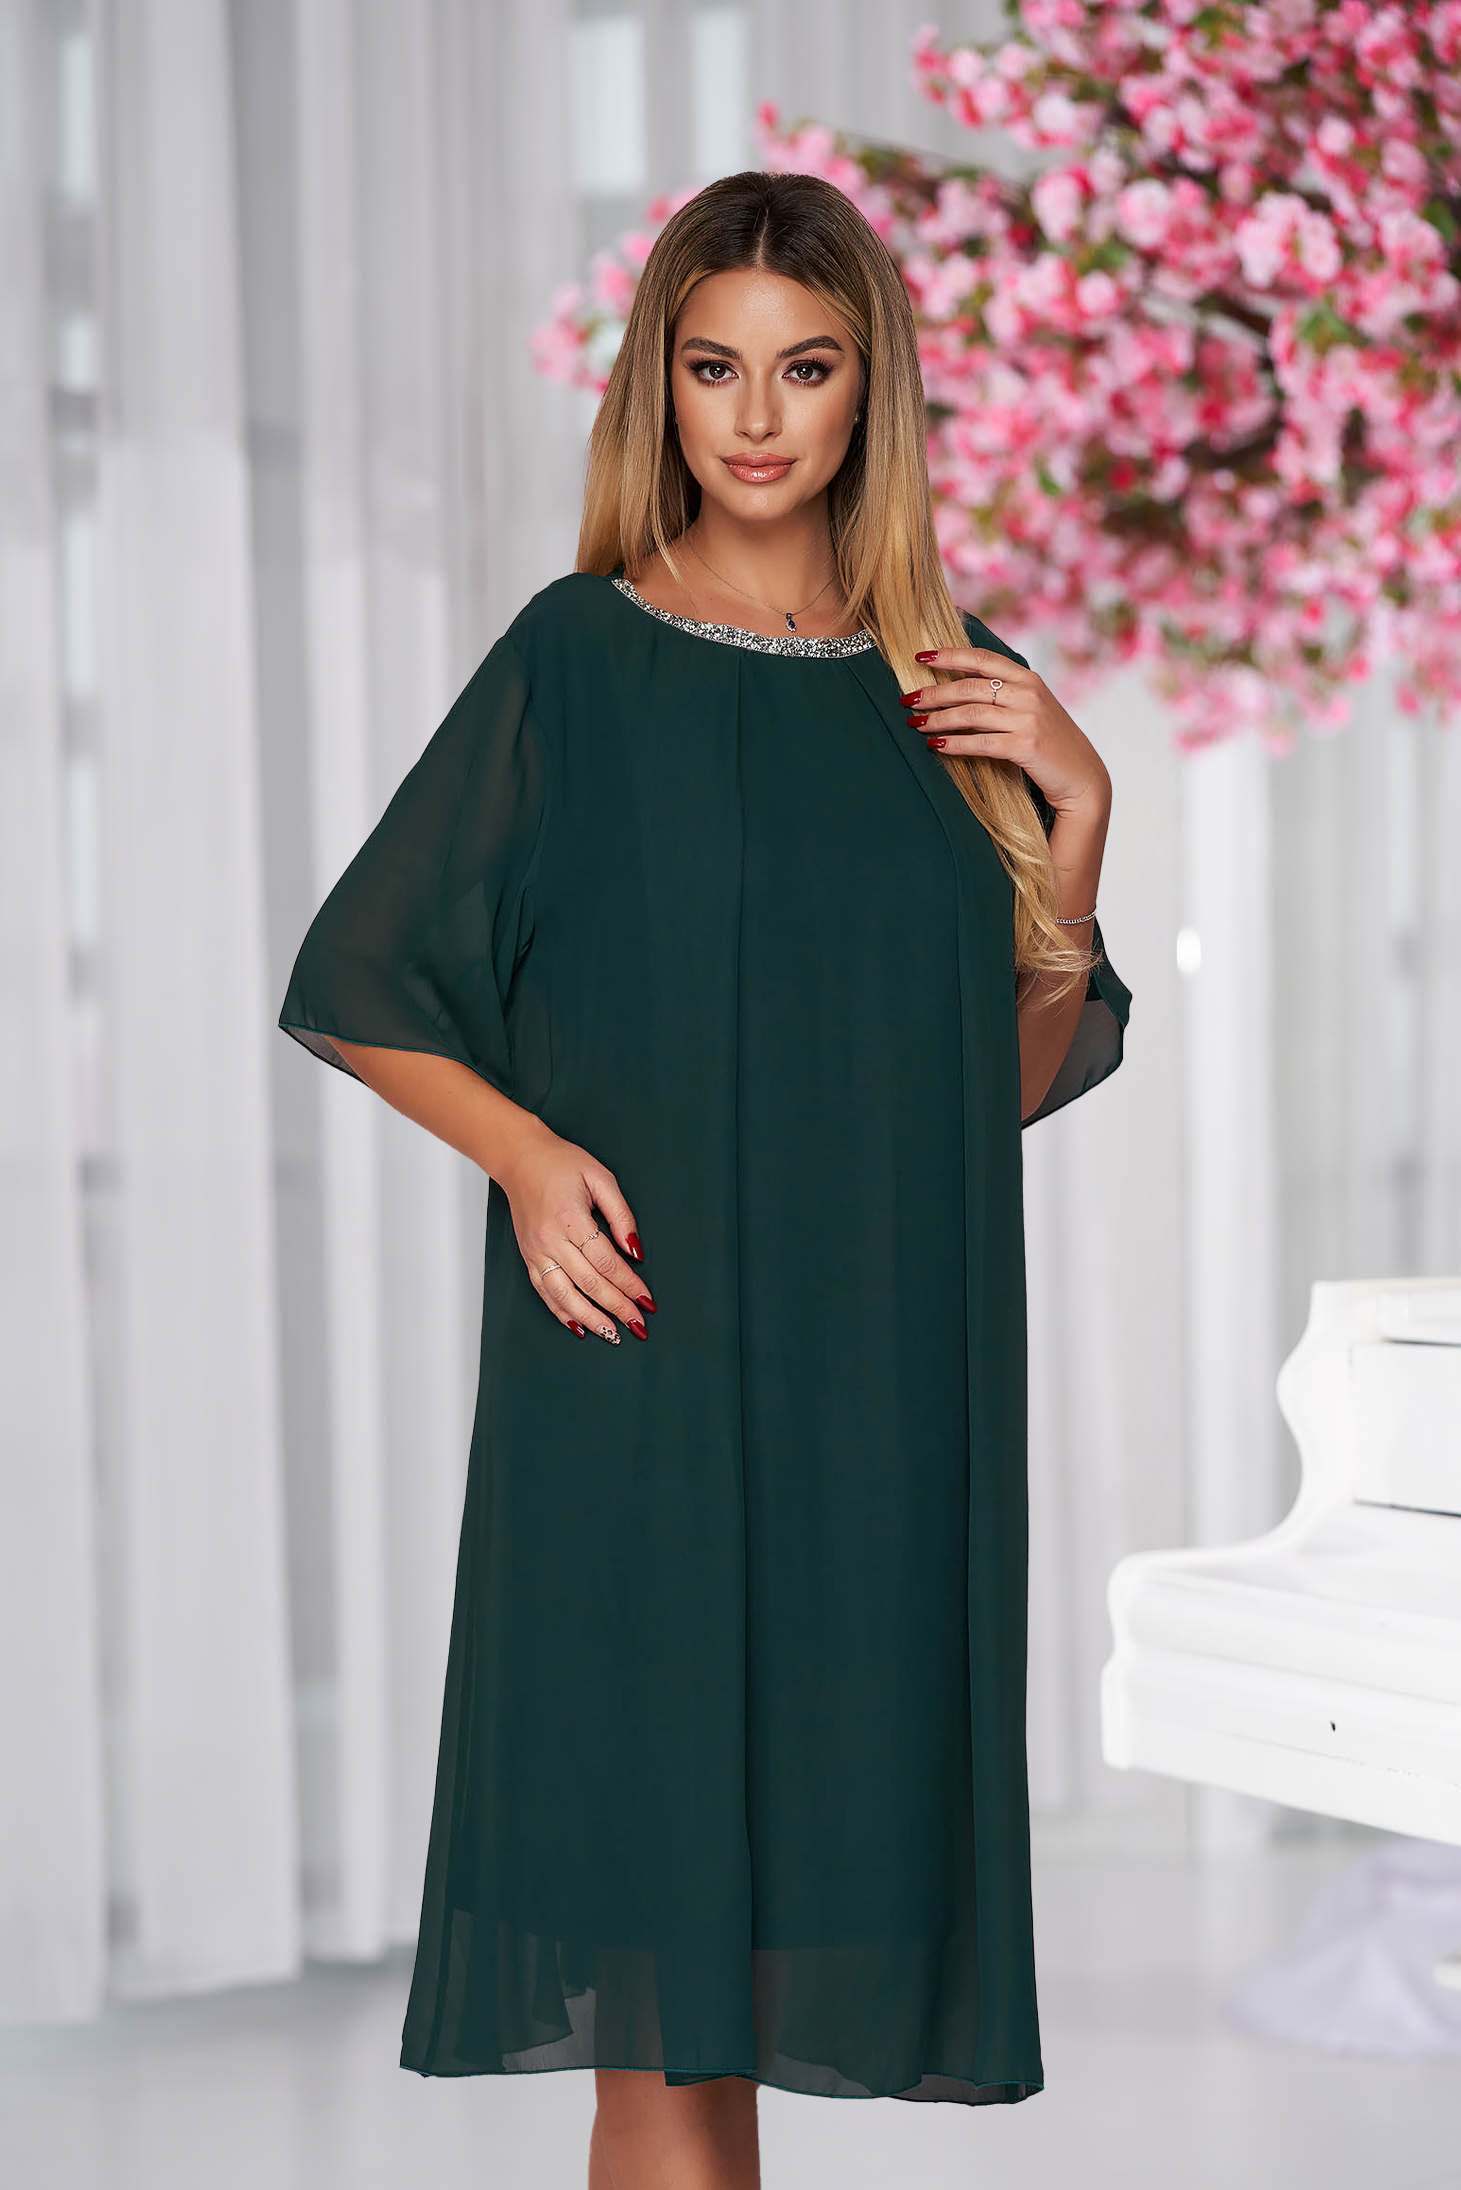 From veil fabric midi loose fit with crystal embellished details green dress